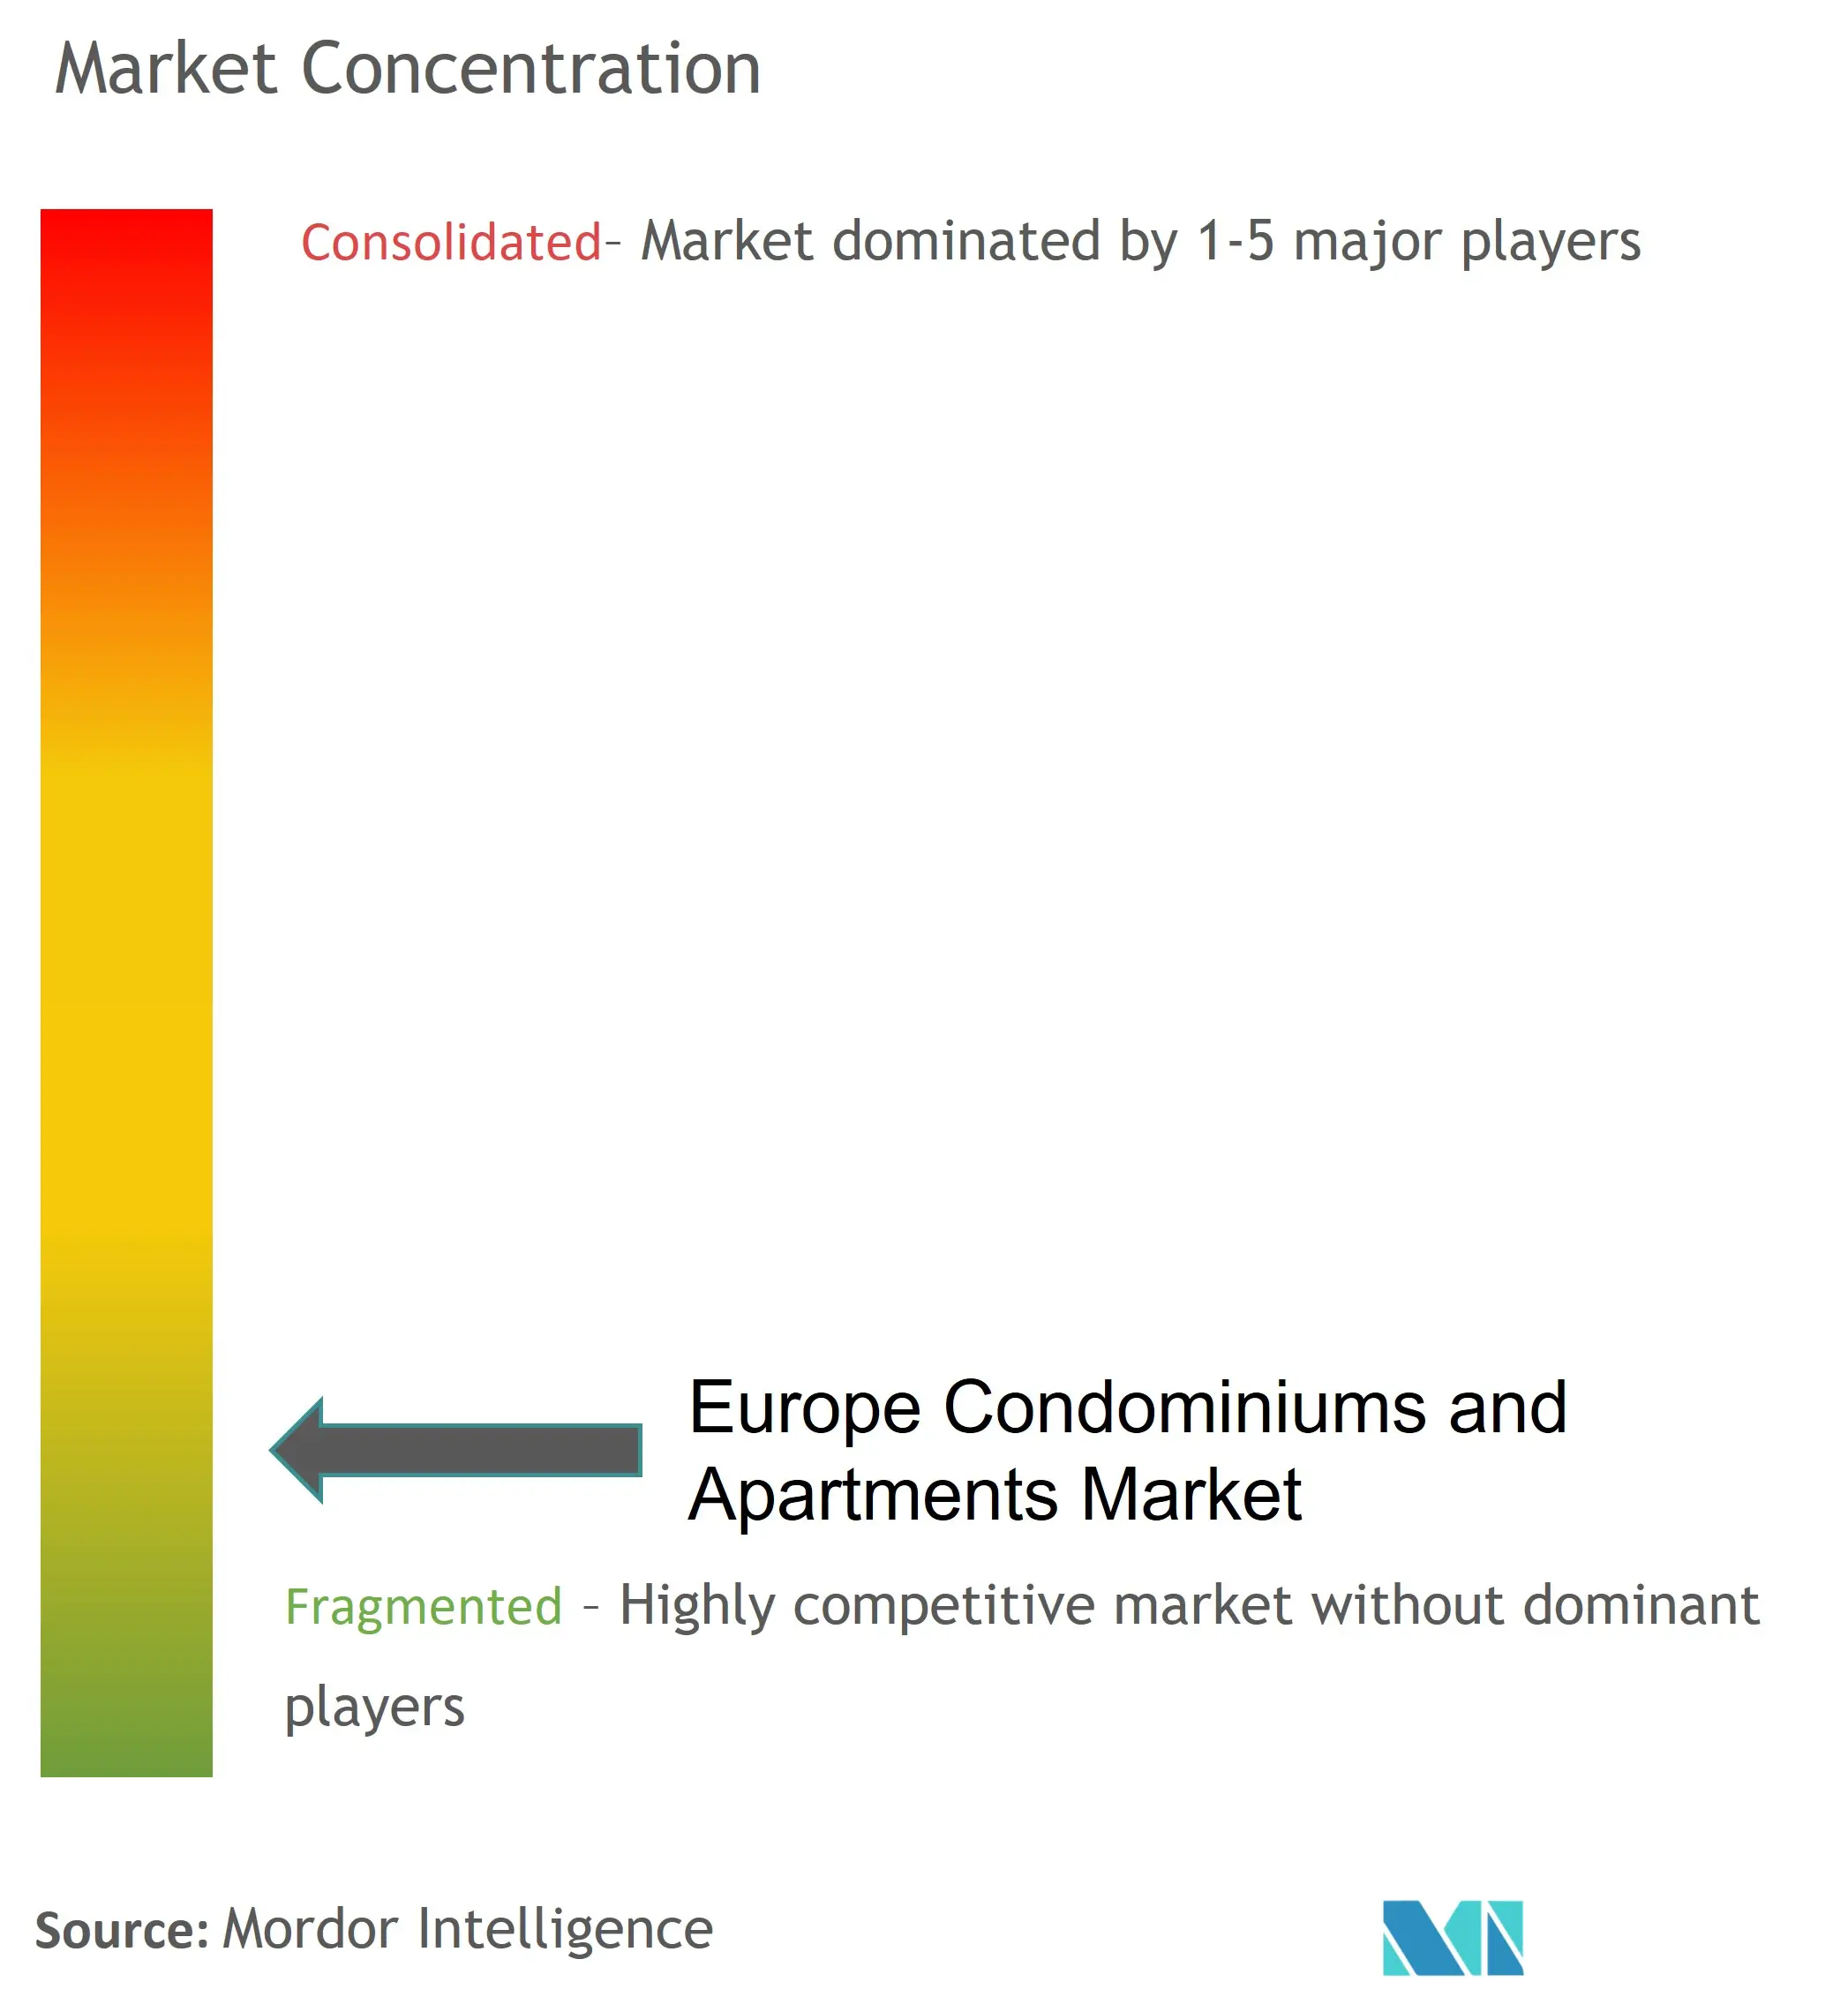 Europe Condominiums and Apartments Market Concentration